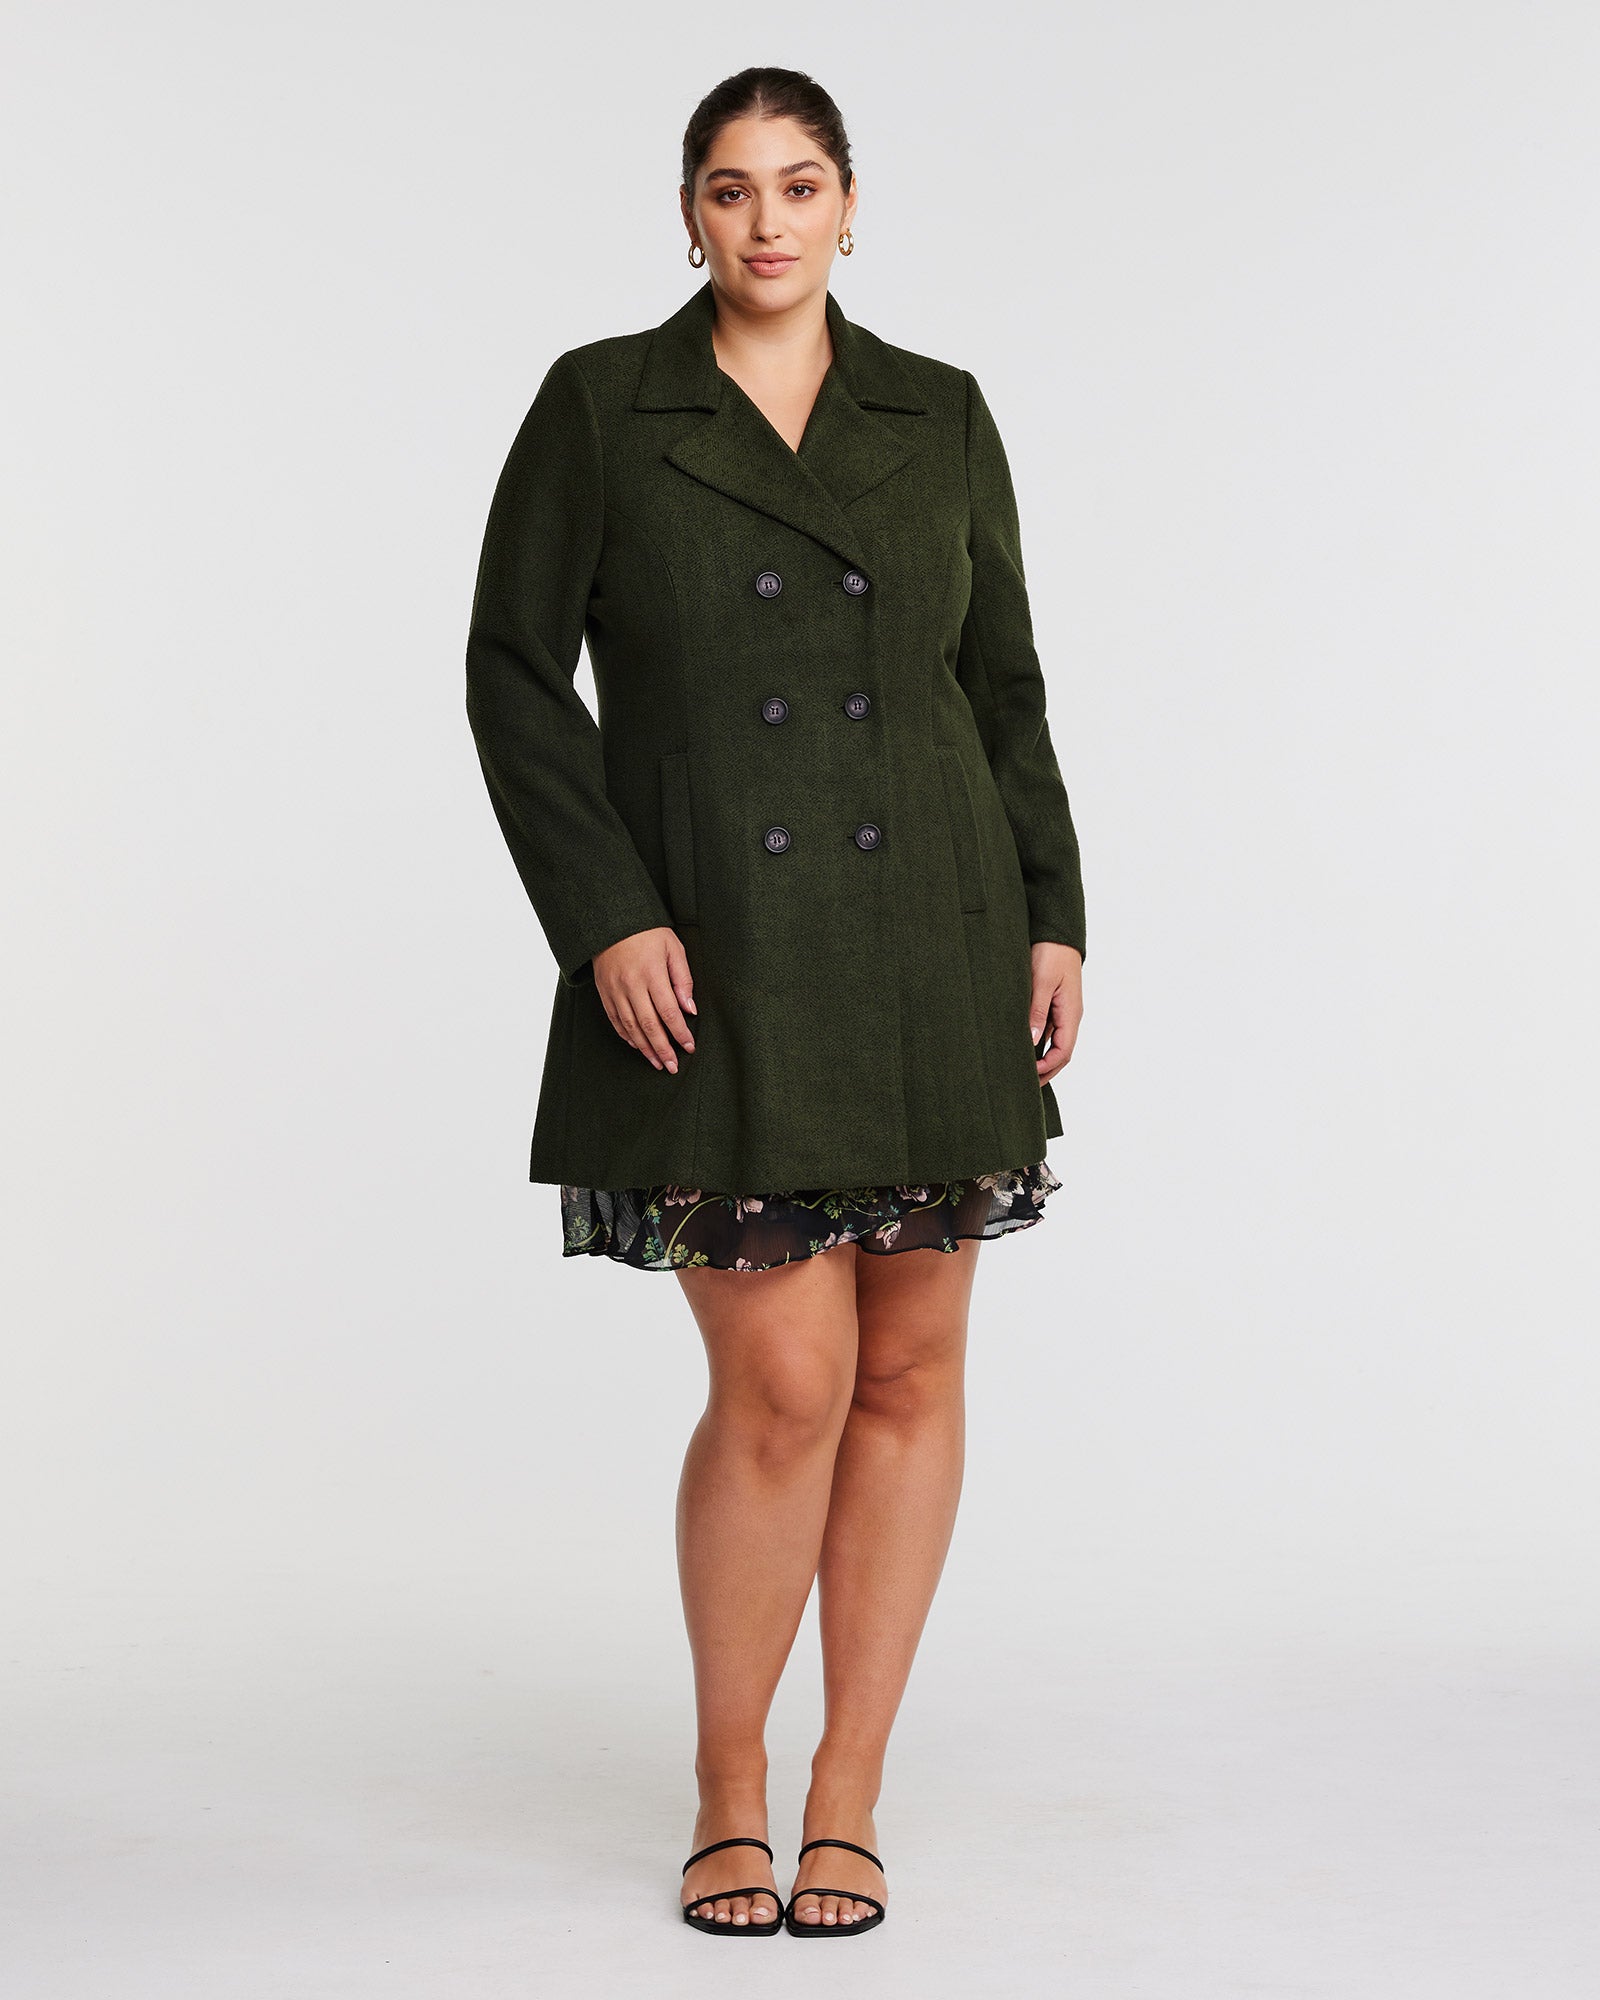 A woman wearing a olive green Homeland Coat with fully functioning pockets.